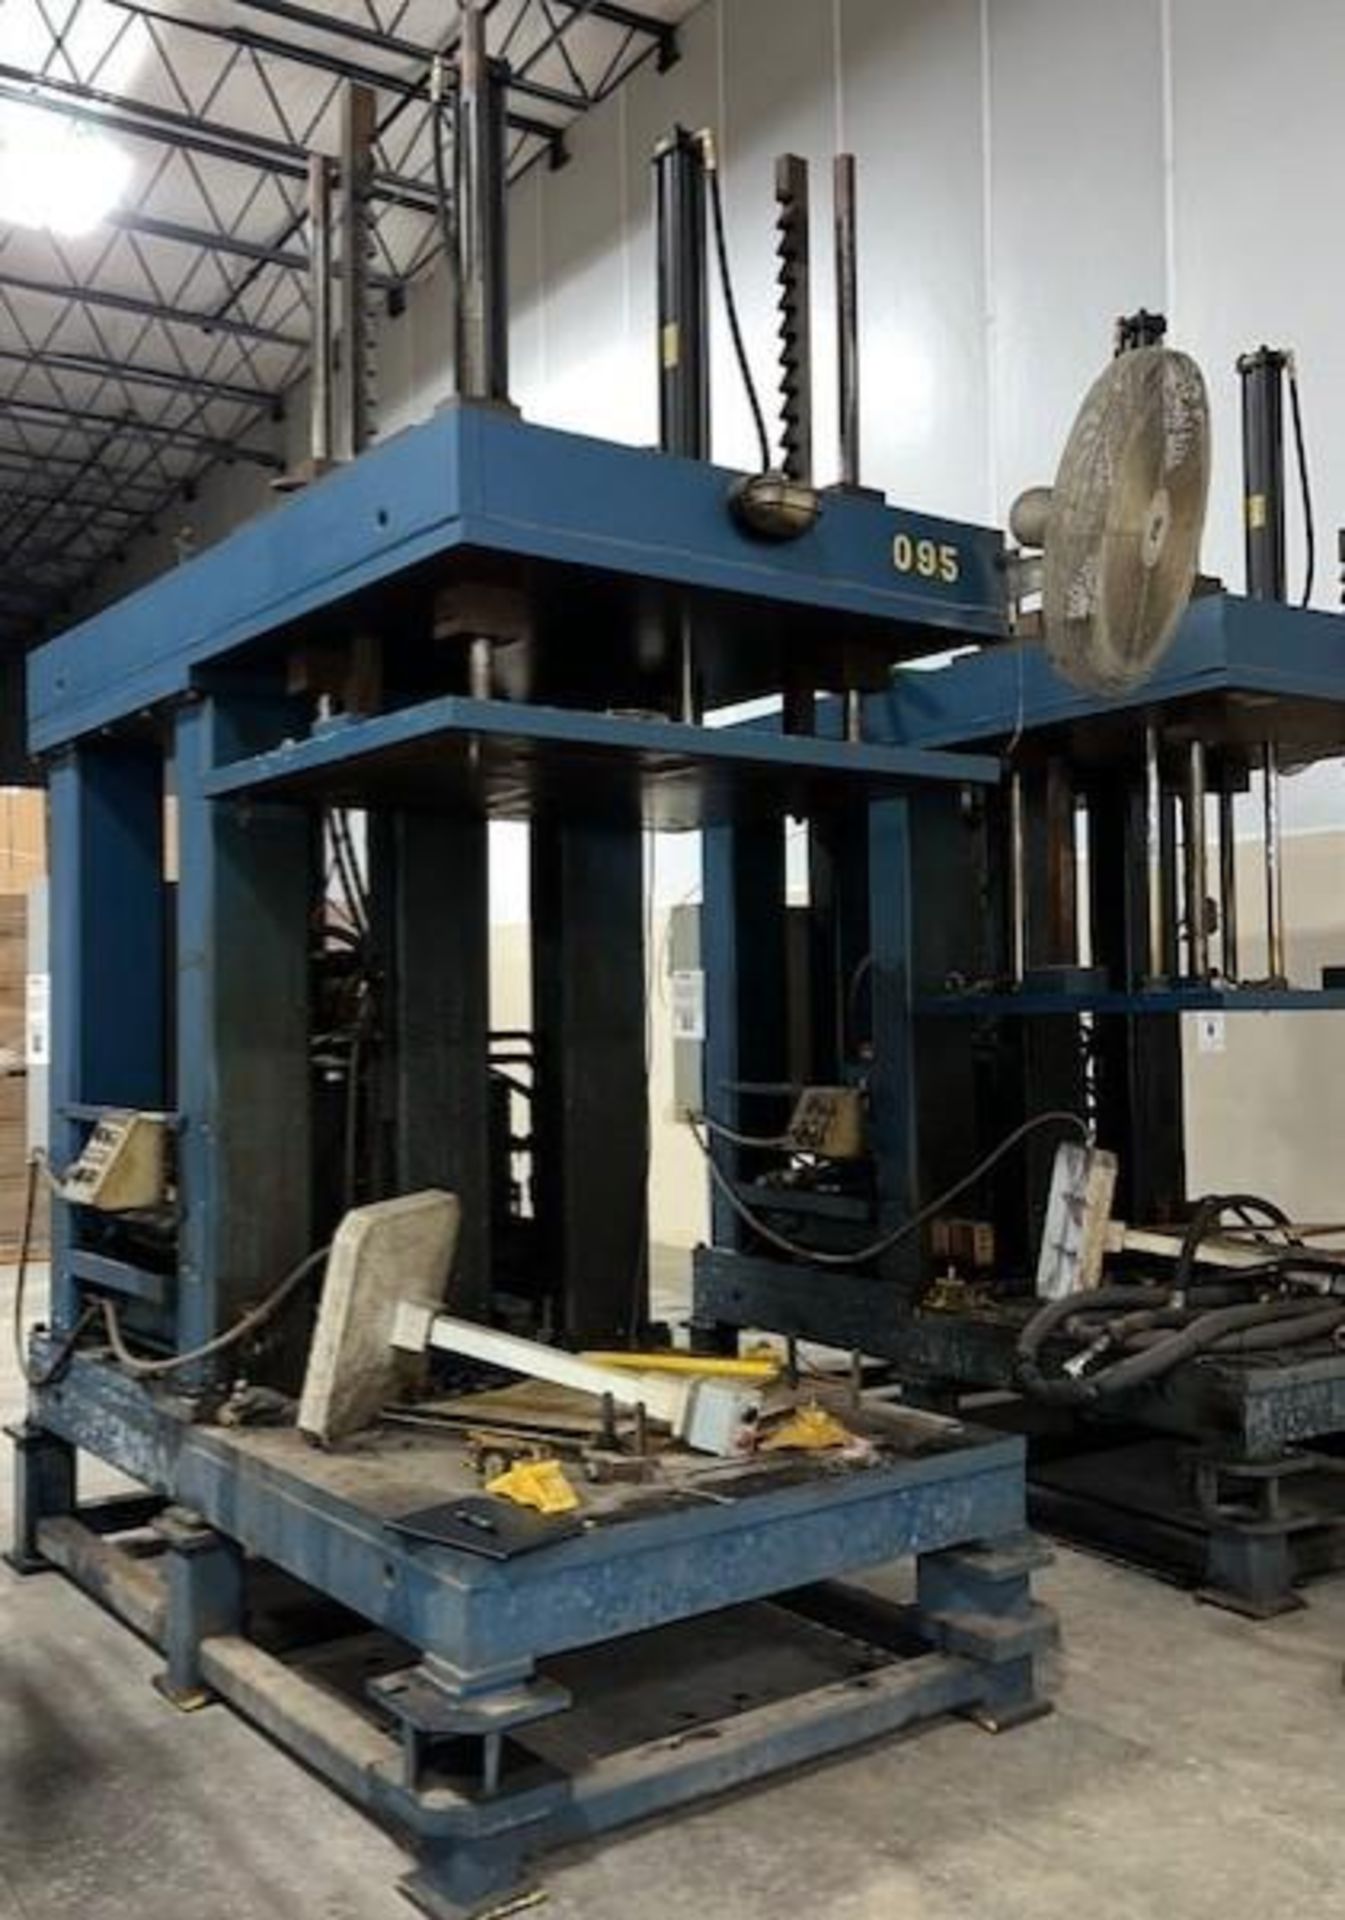 Lot of (2) Hydraulic Presses for Automotive Molding - Image 4 of 12